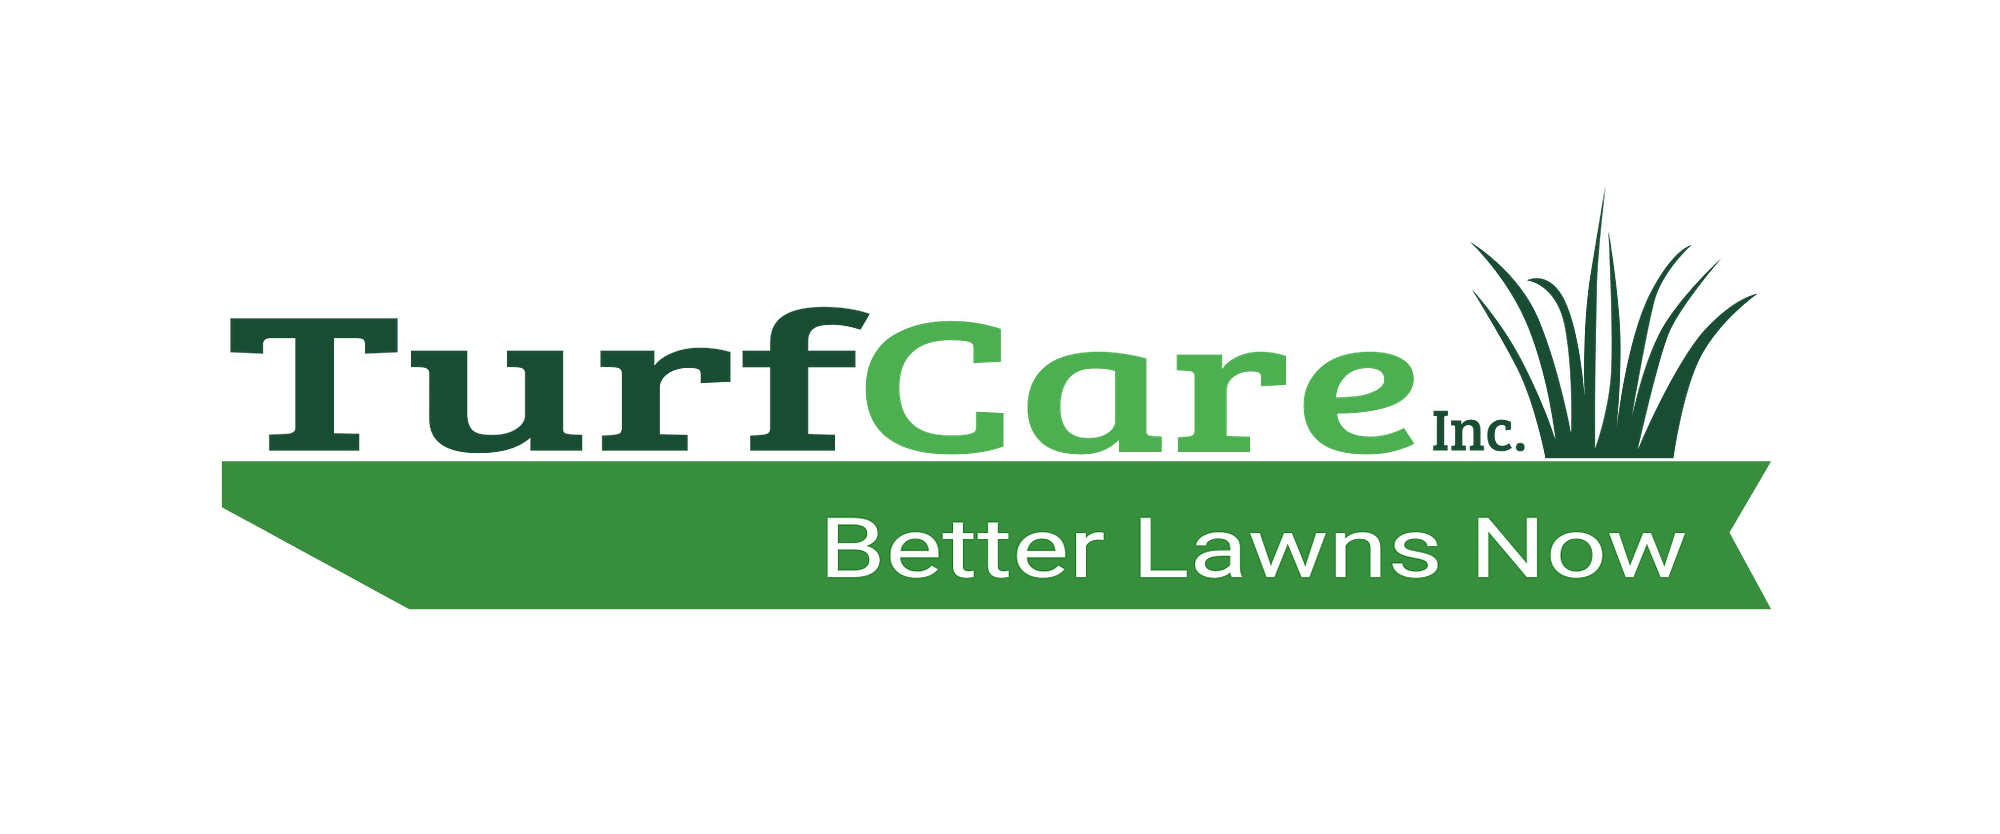 Christmas Lighting Lawn Mower Repair and Service and sales